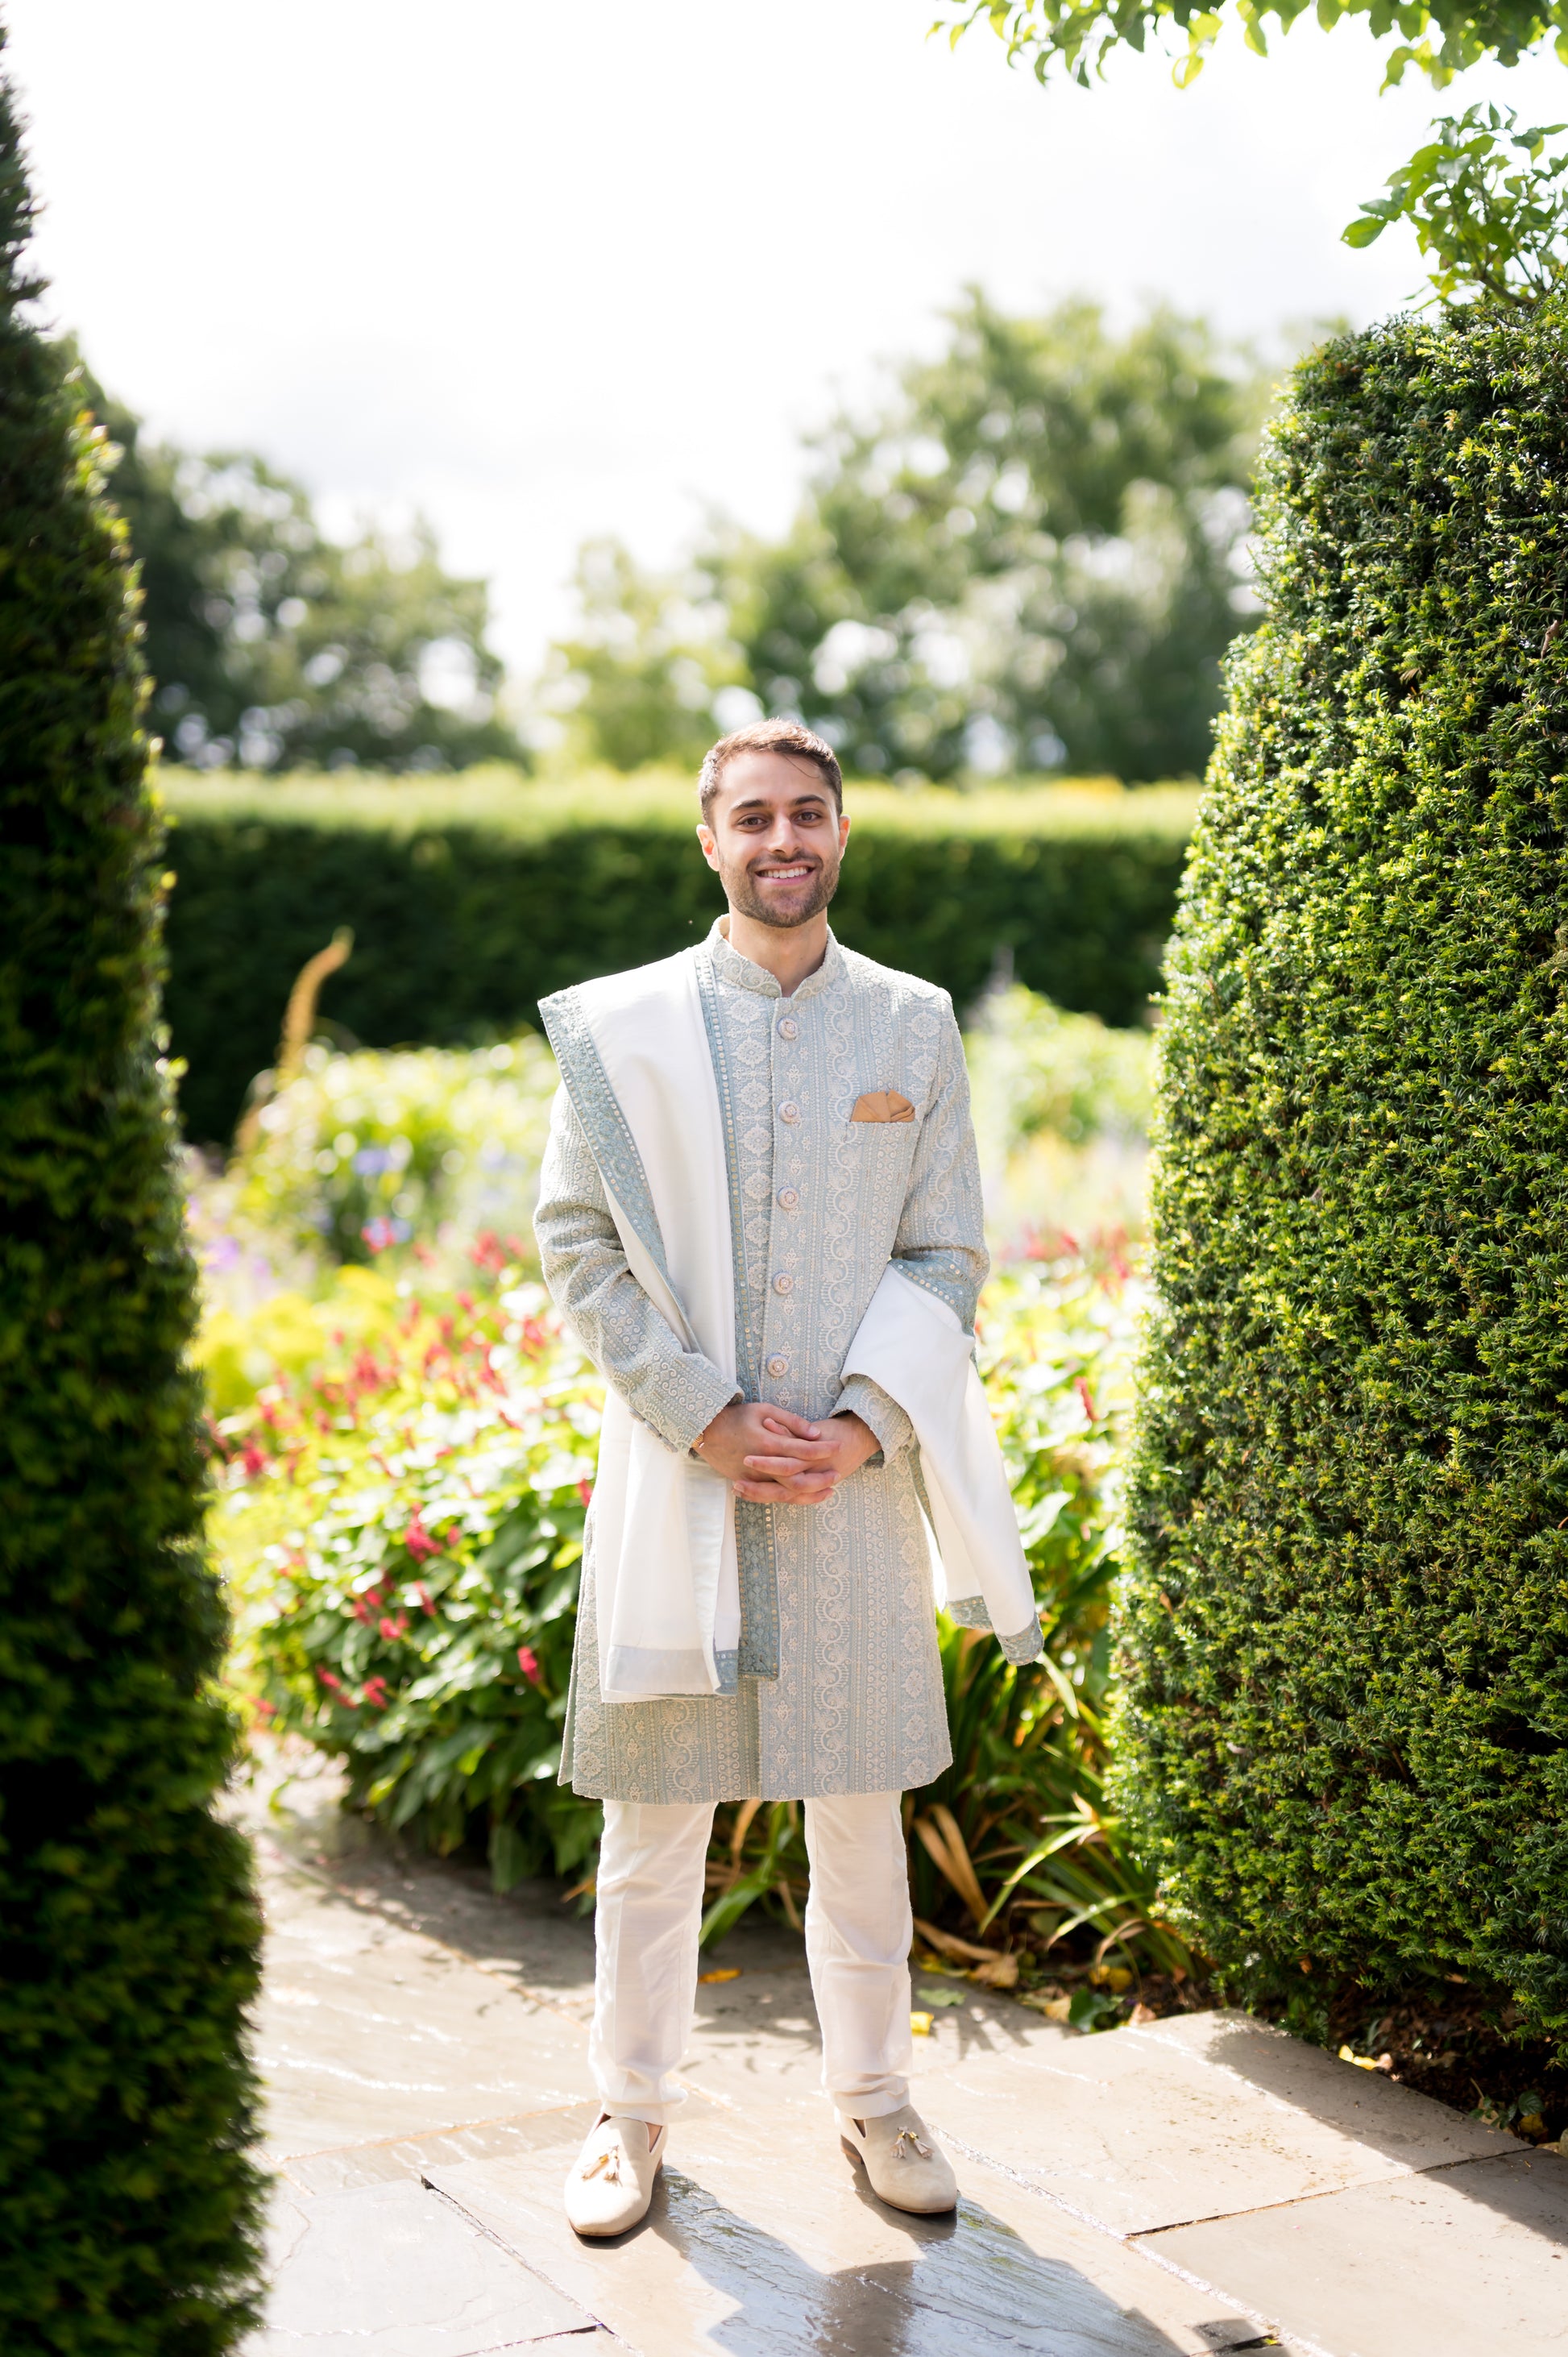 Groom in ice blue sherwani and white trousers, accessorized with off-white/cream suede Mojaris/Mojris, surrounded by trees